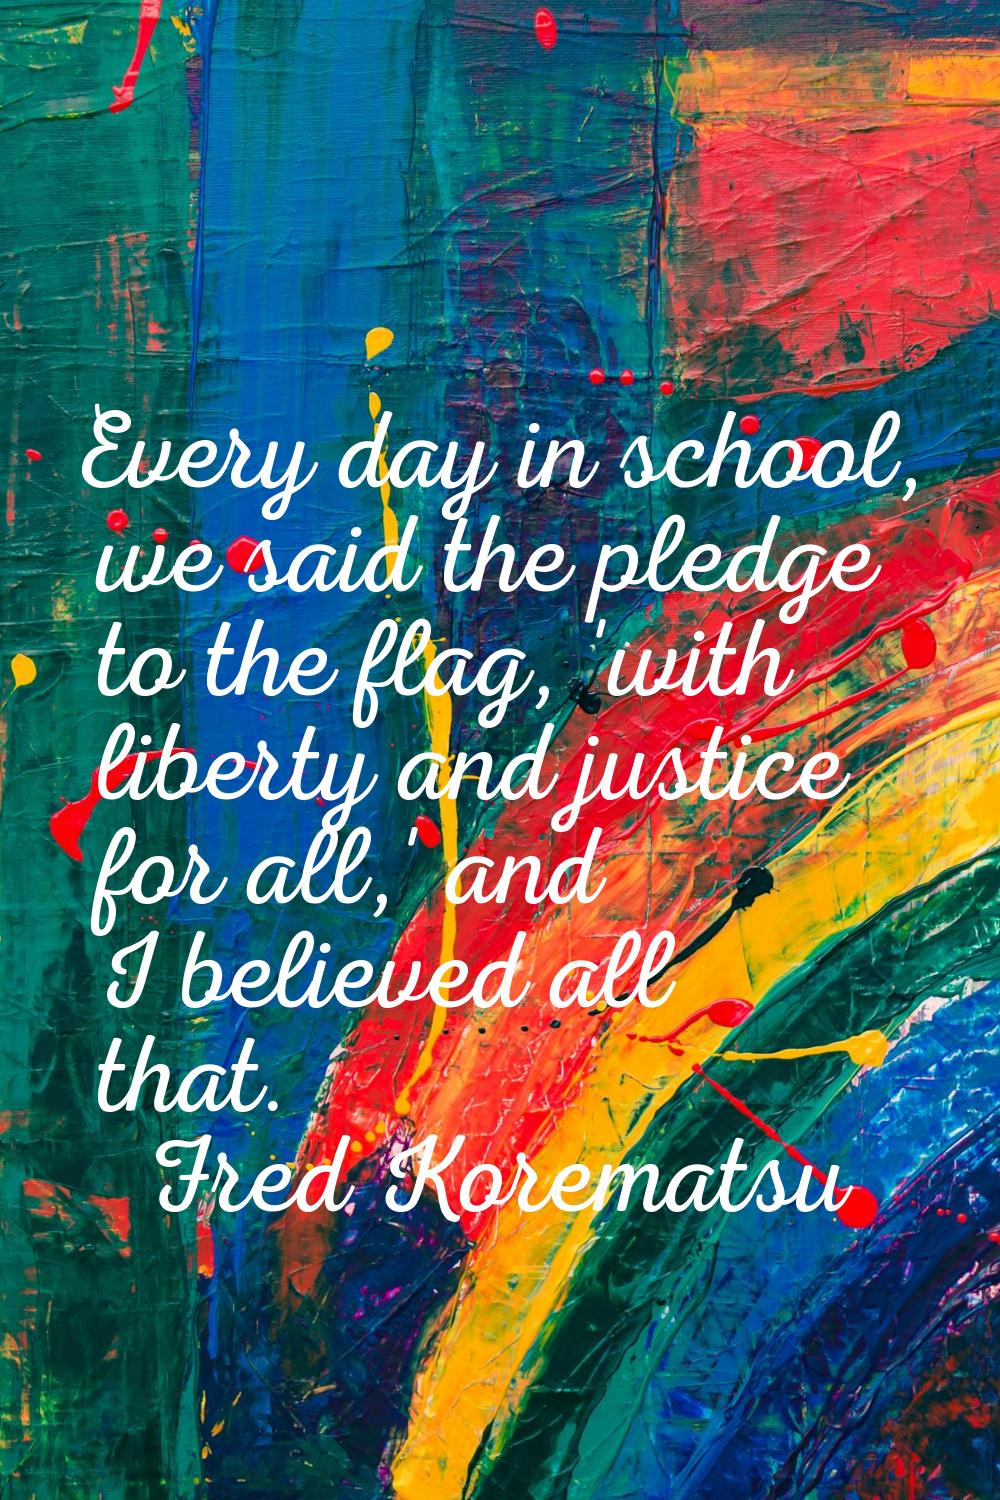 Every day in school, we said the pledge to the flag, 'with liberty and justice for all,' and I beli